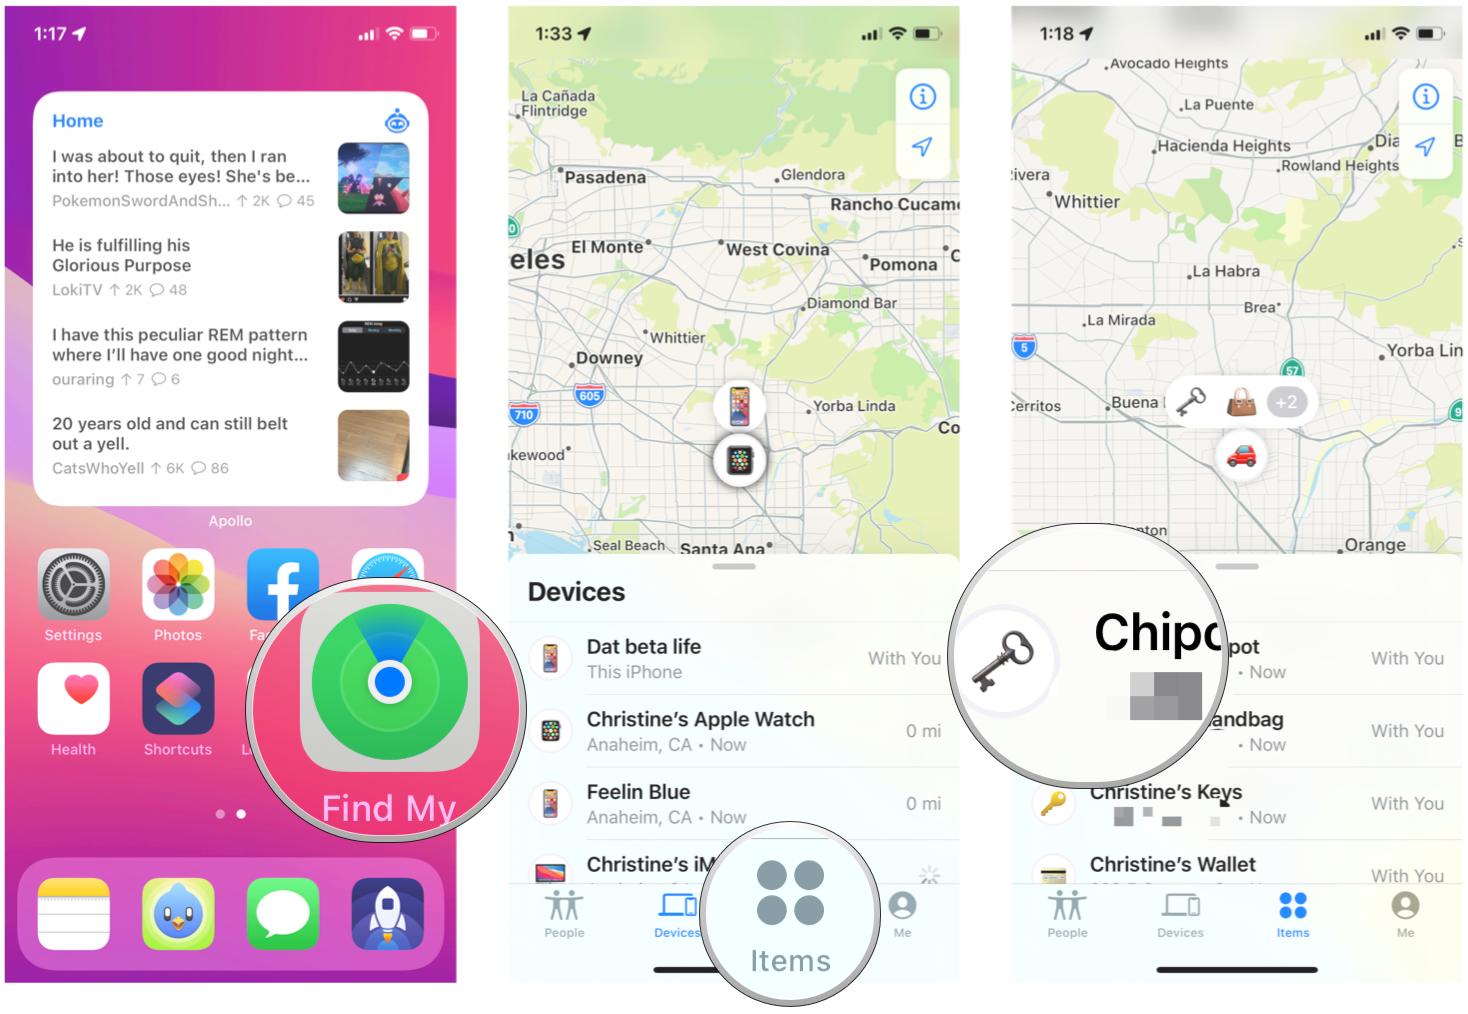 Enable left behind alerts for AirTags in iOS 15 by showing: Launch Find My app, tap Items, select your AIrTag that you want left behind alerts for